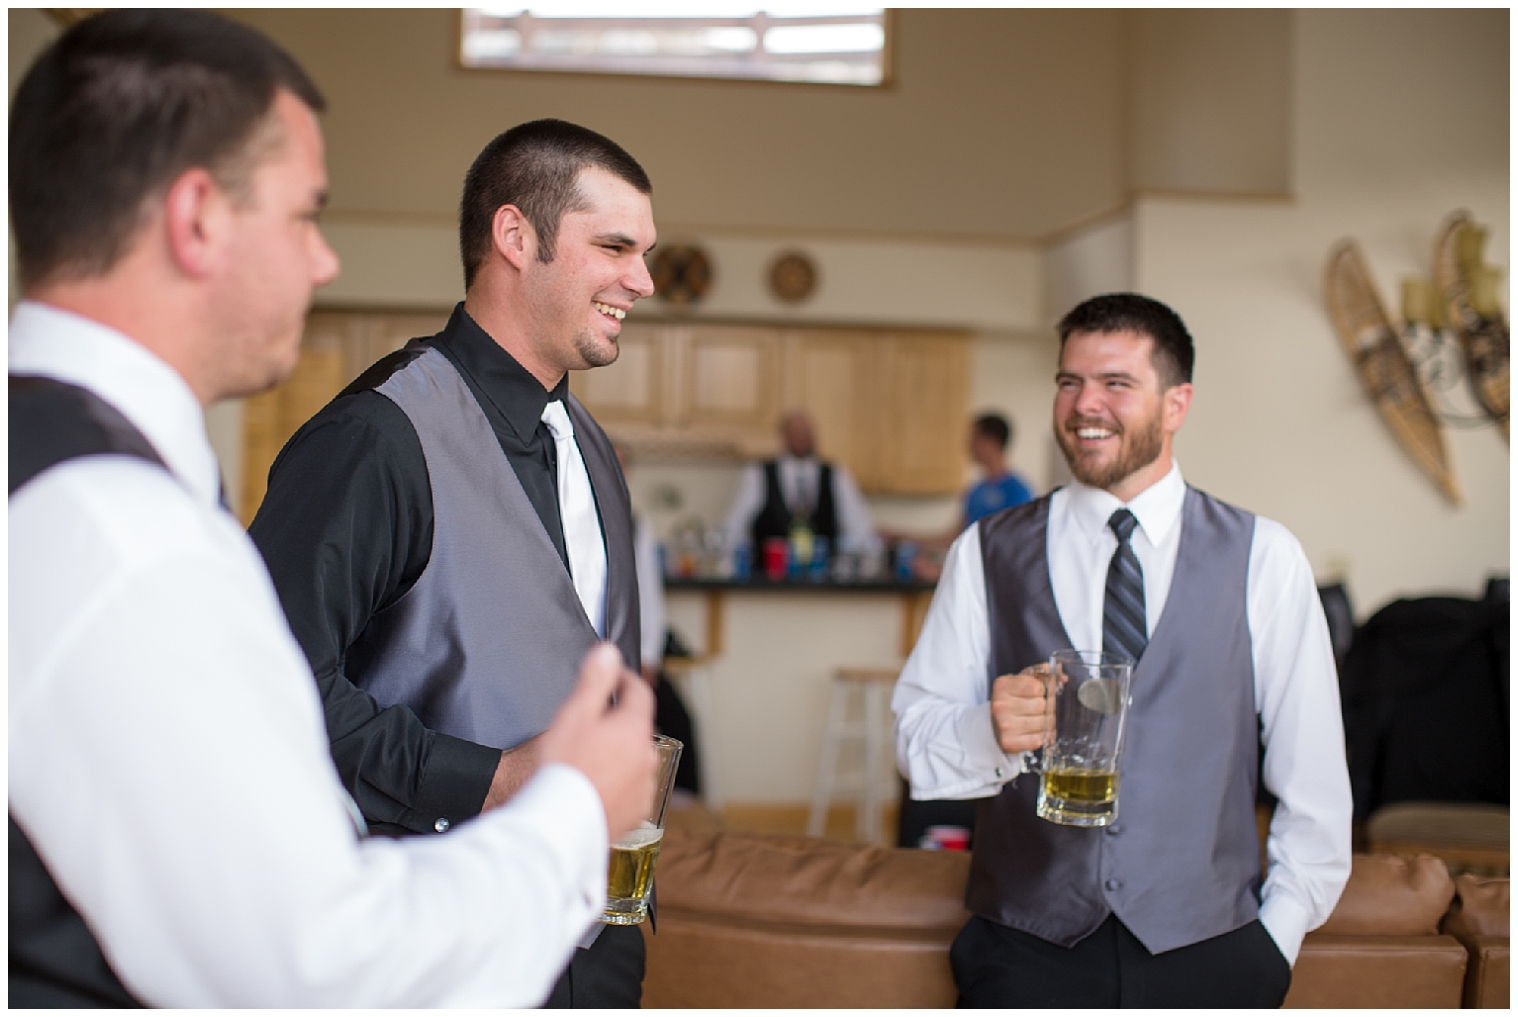 Groom enjoys some time with his groomsmen prior to his wedding at Sevens in Breckenridge.